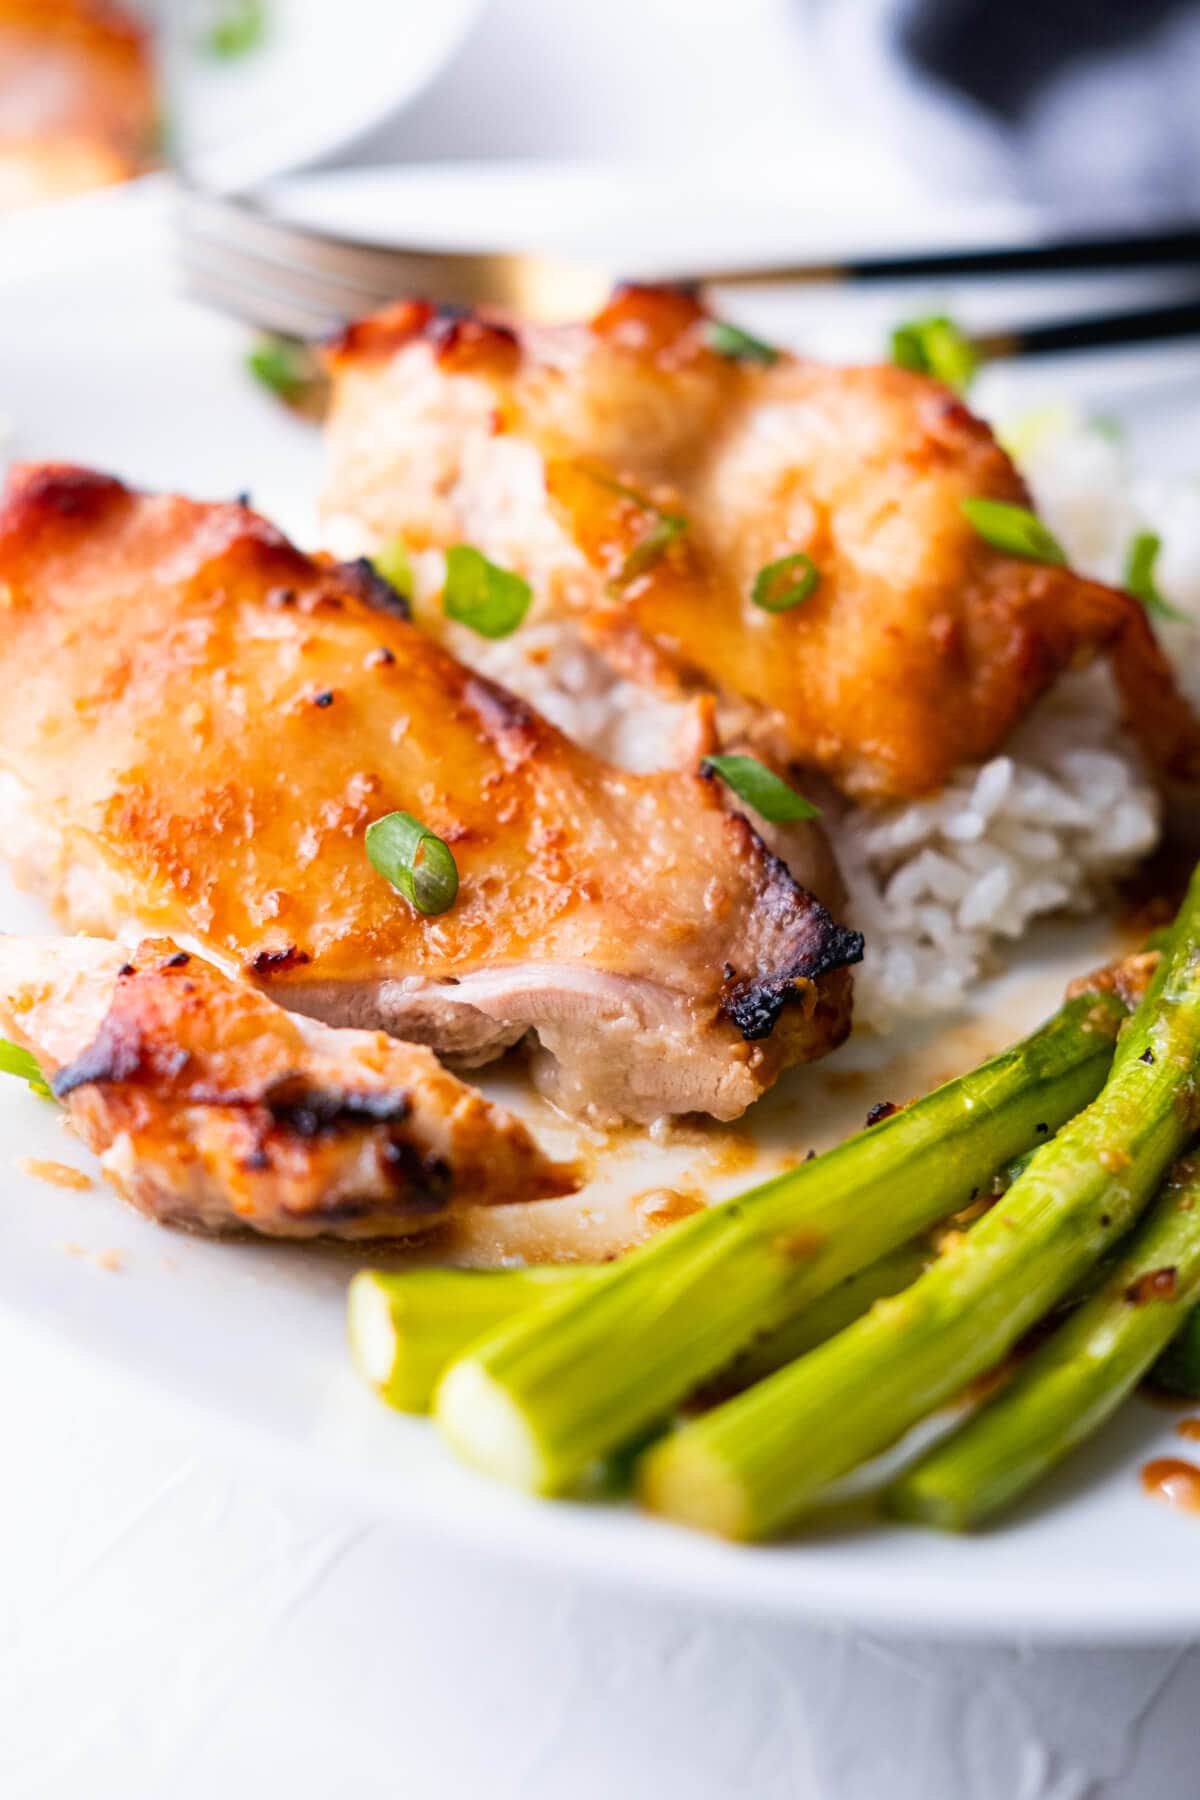 One chicken thigh is sliced into small piece, revealing its juicy and tender interior. 